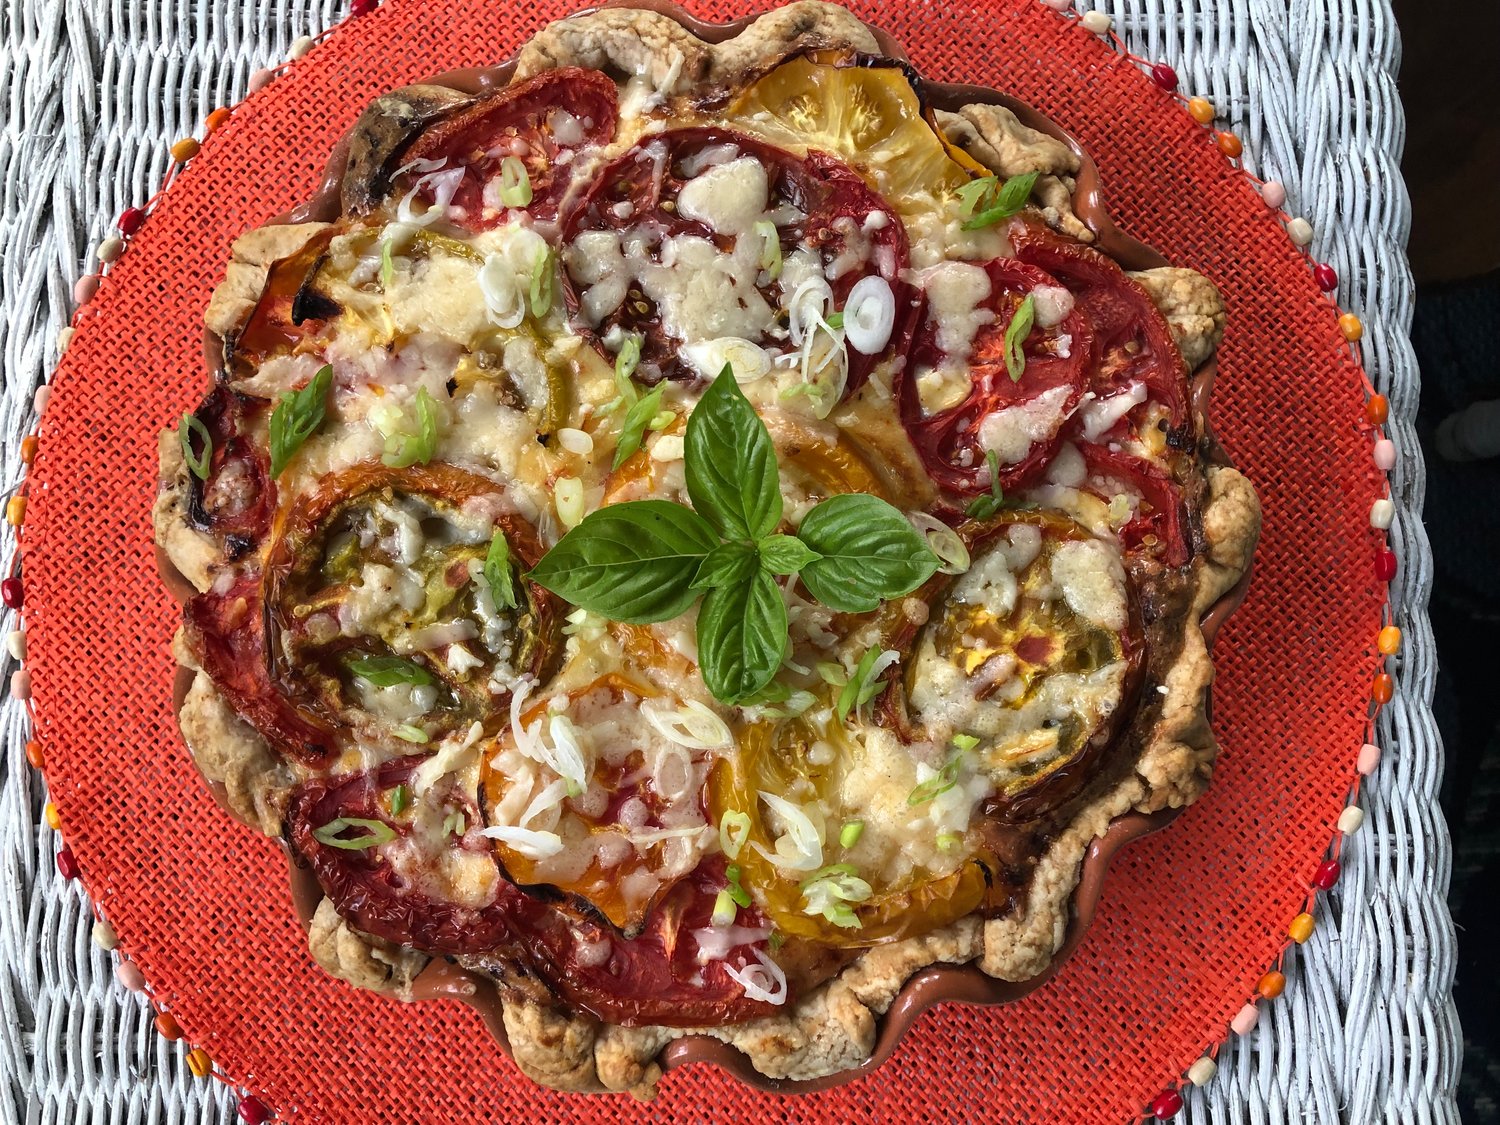 This savory tomato pie is just as tasty with a store-bought crust.